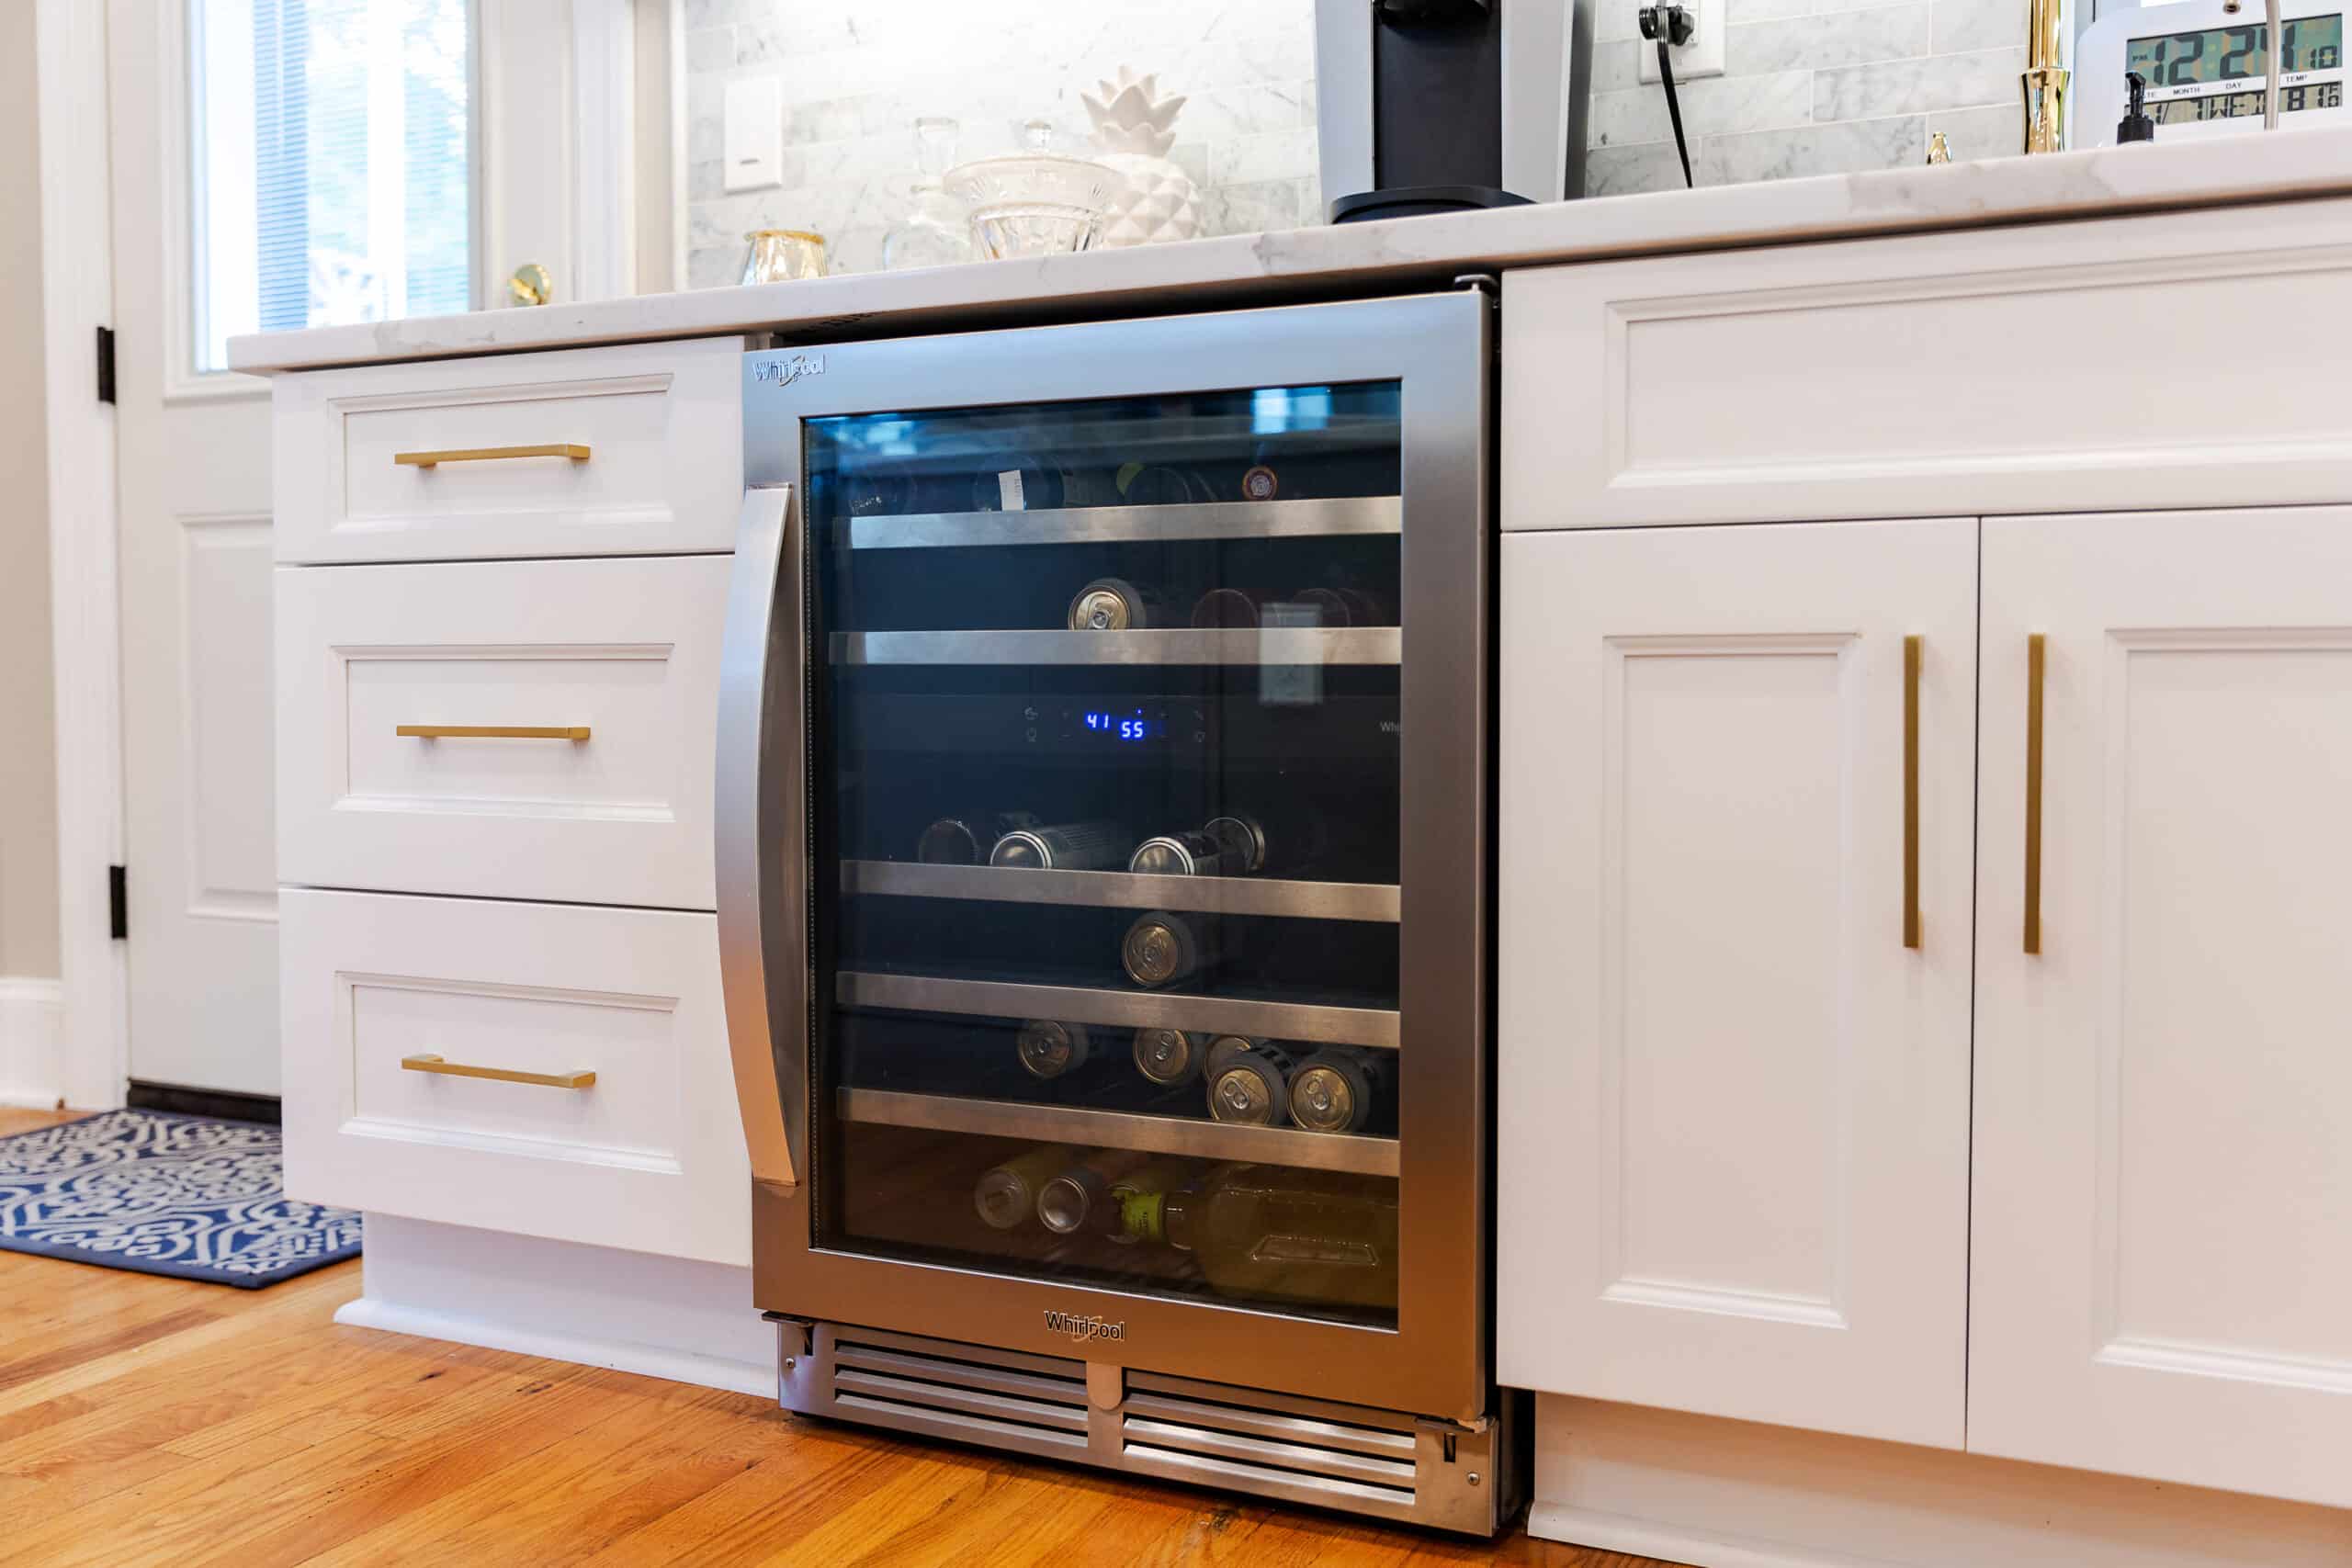 A wine cooler in a kitchen with white cabinets